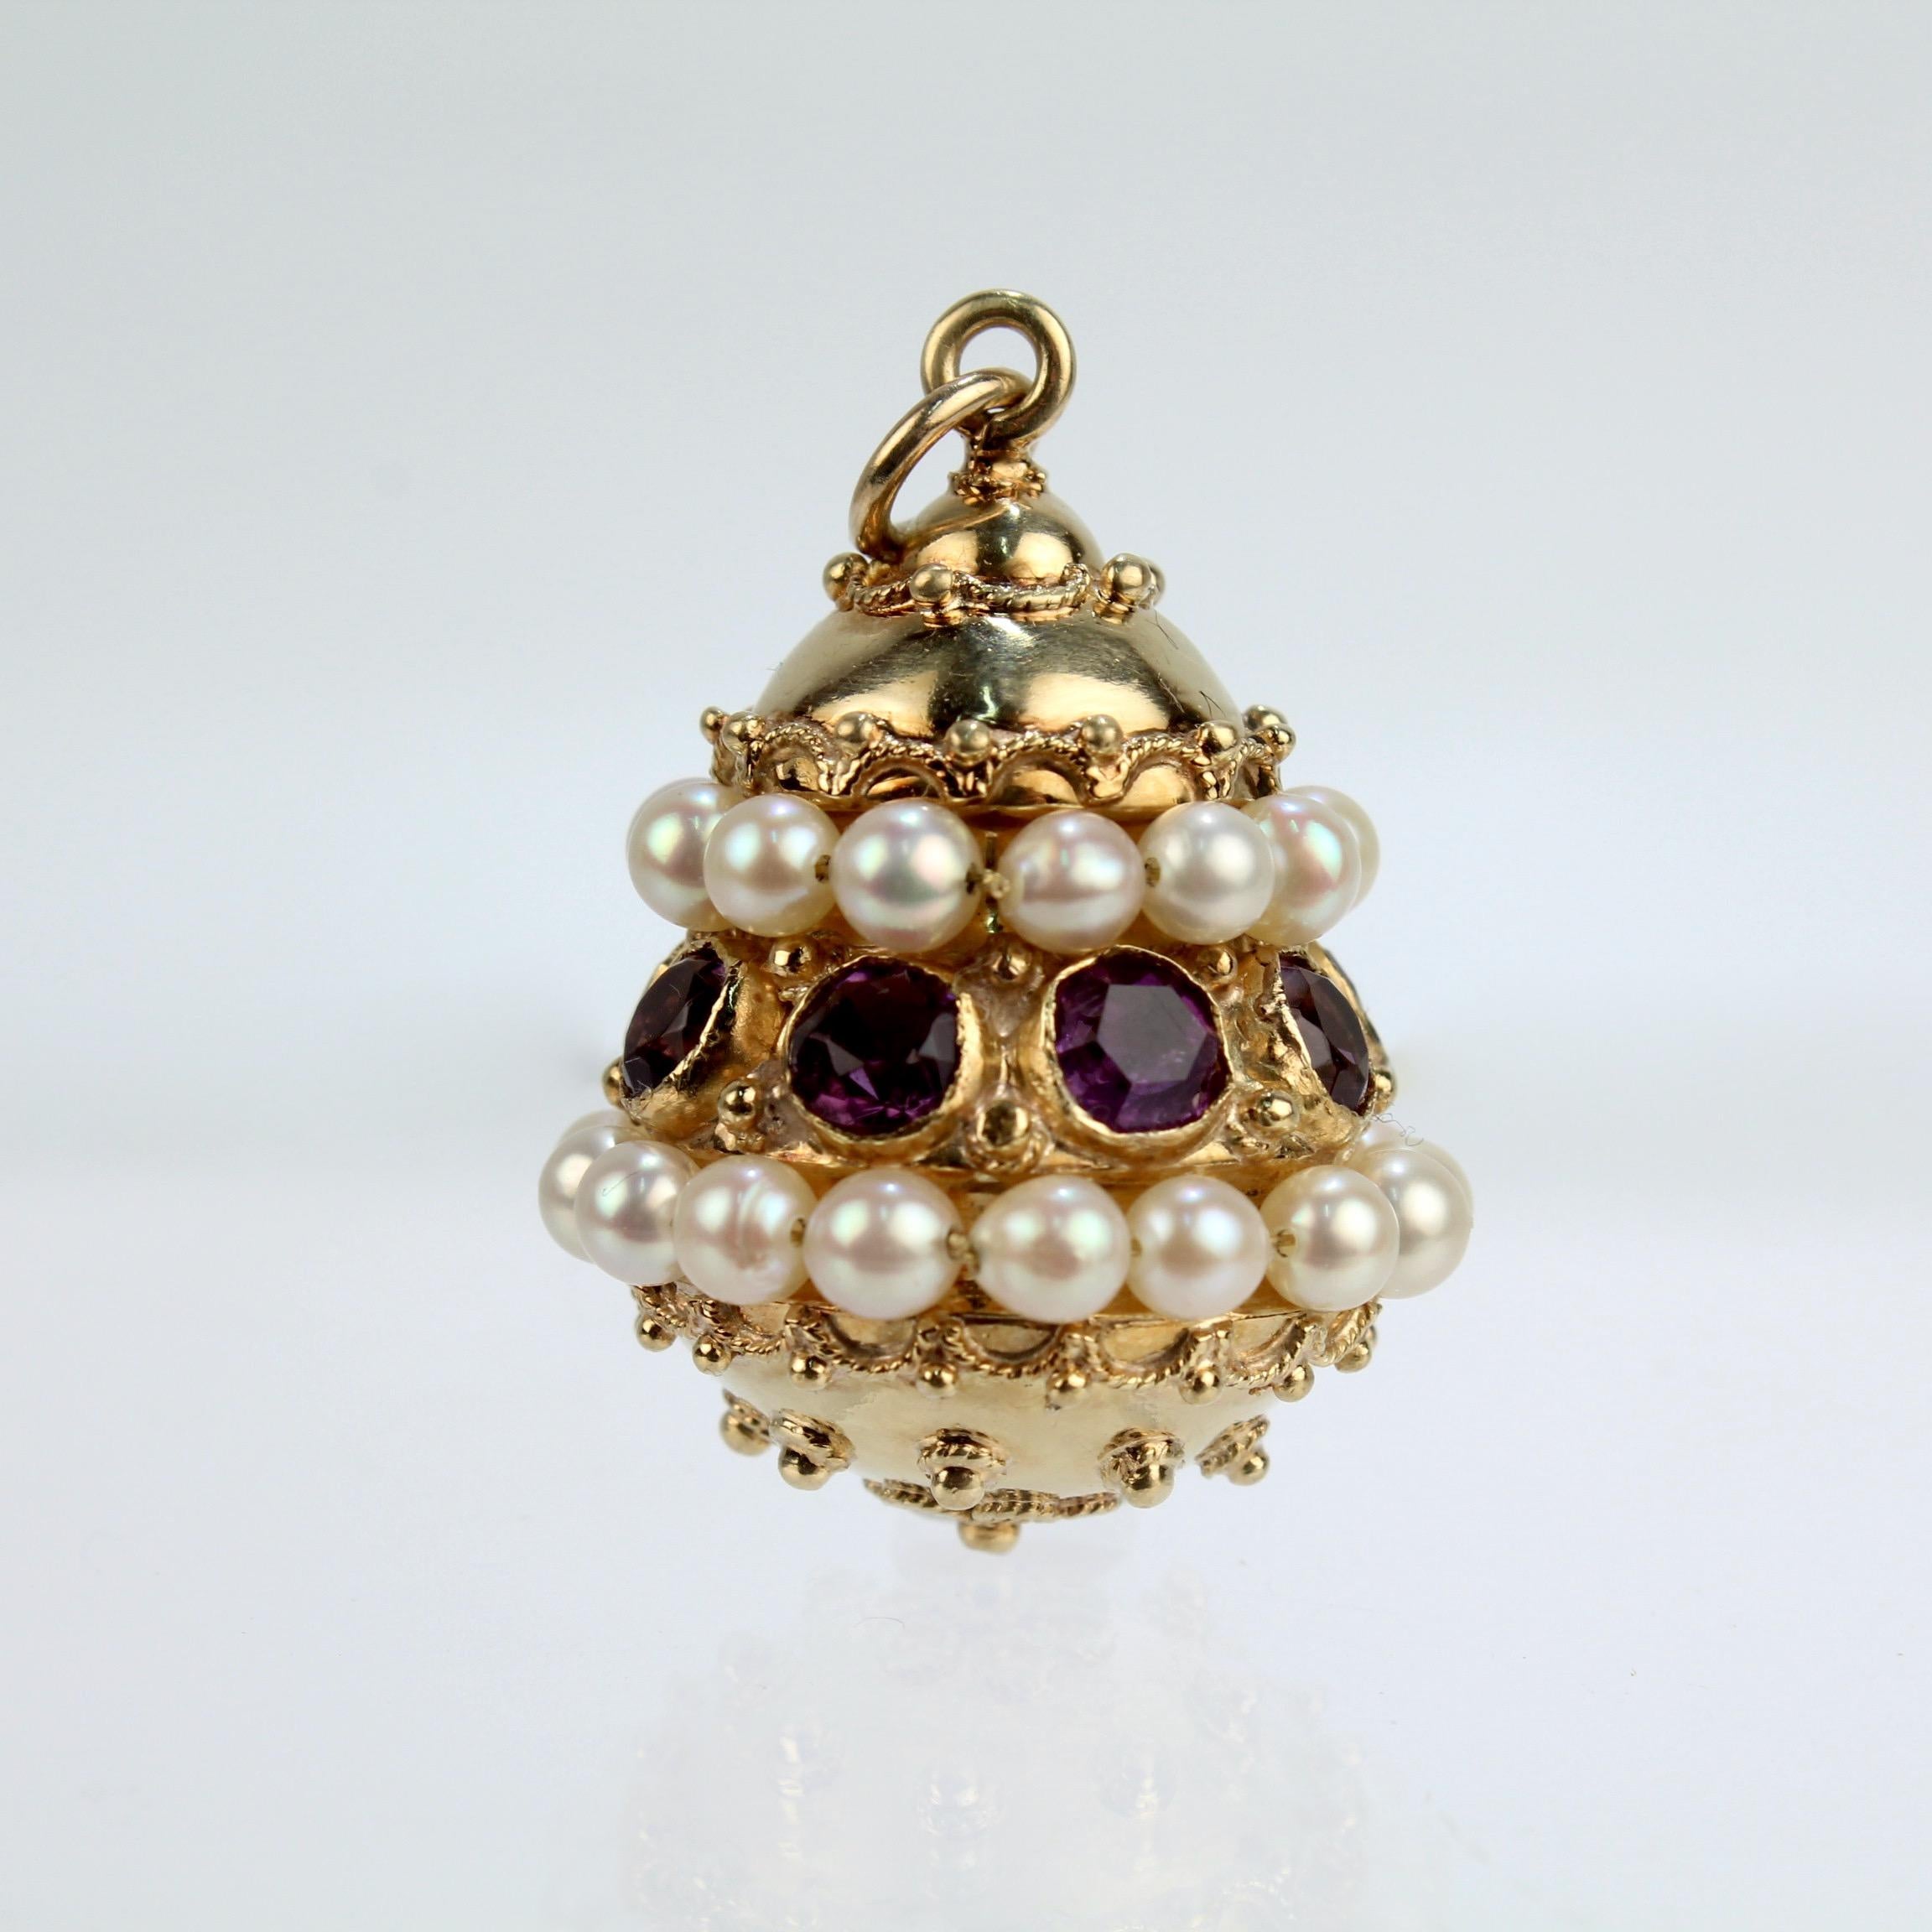 A very fine vintage gold, amethyst and pearl Etruscan Revival style pendant or charm. 

The bell shaped 18k gold pendant is ornately set with wire work and granulation throughout. At its center is a row of bezel set round amethyst gemstones that run